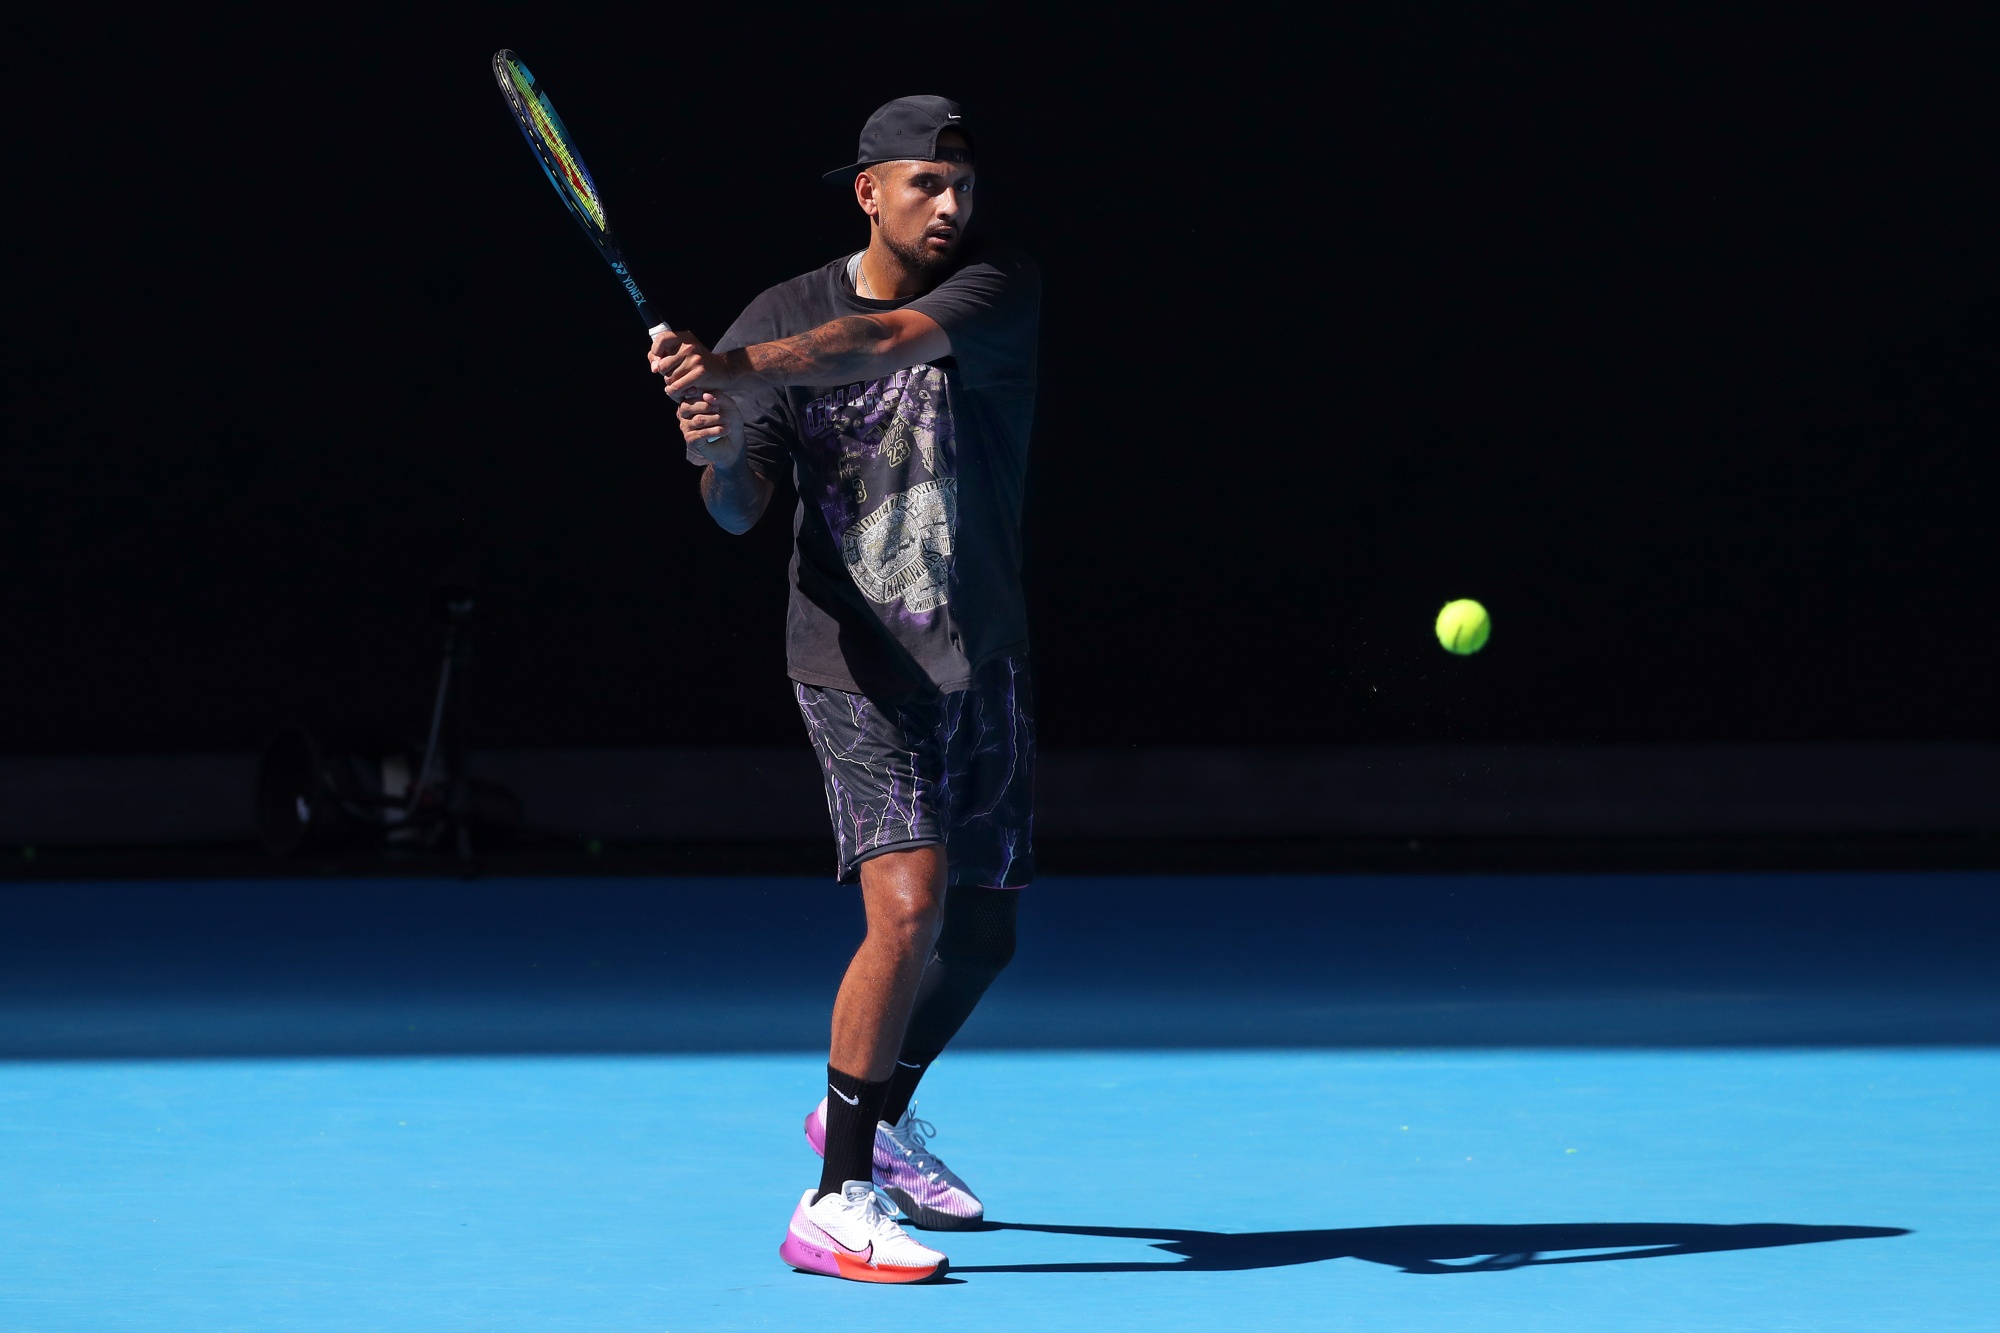 Australian Open Nick Kyrgios Pulls Out of Tennis Tournament Due to Injured Knee